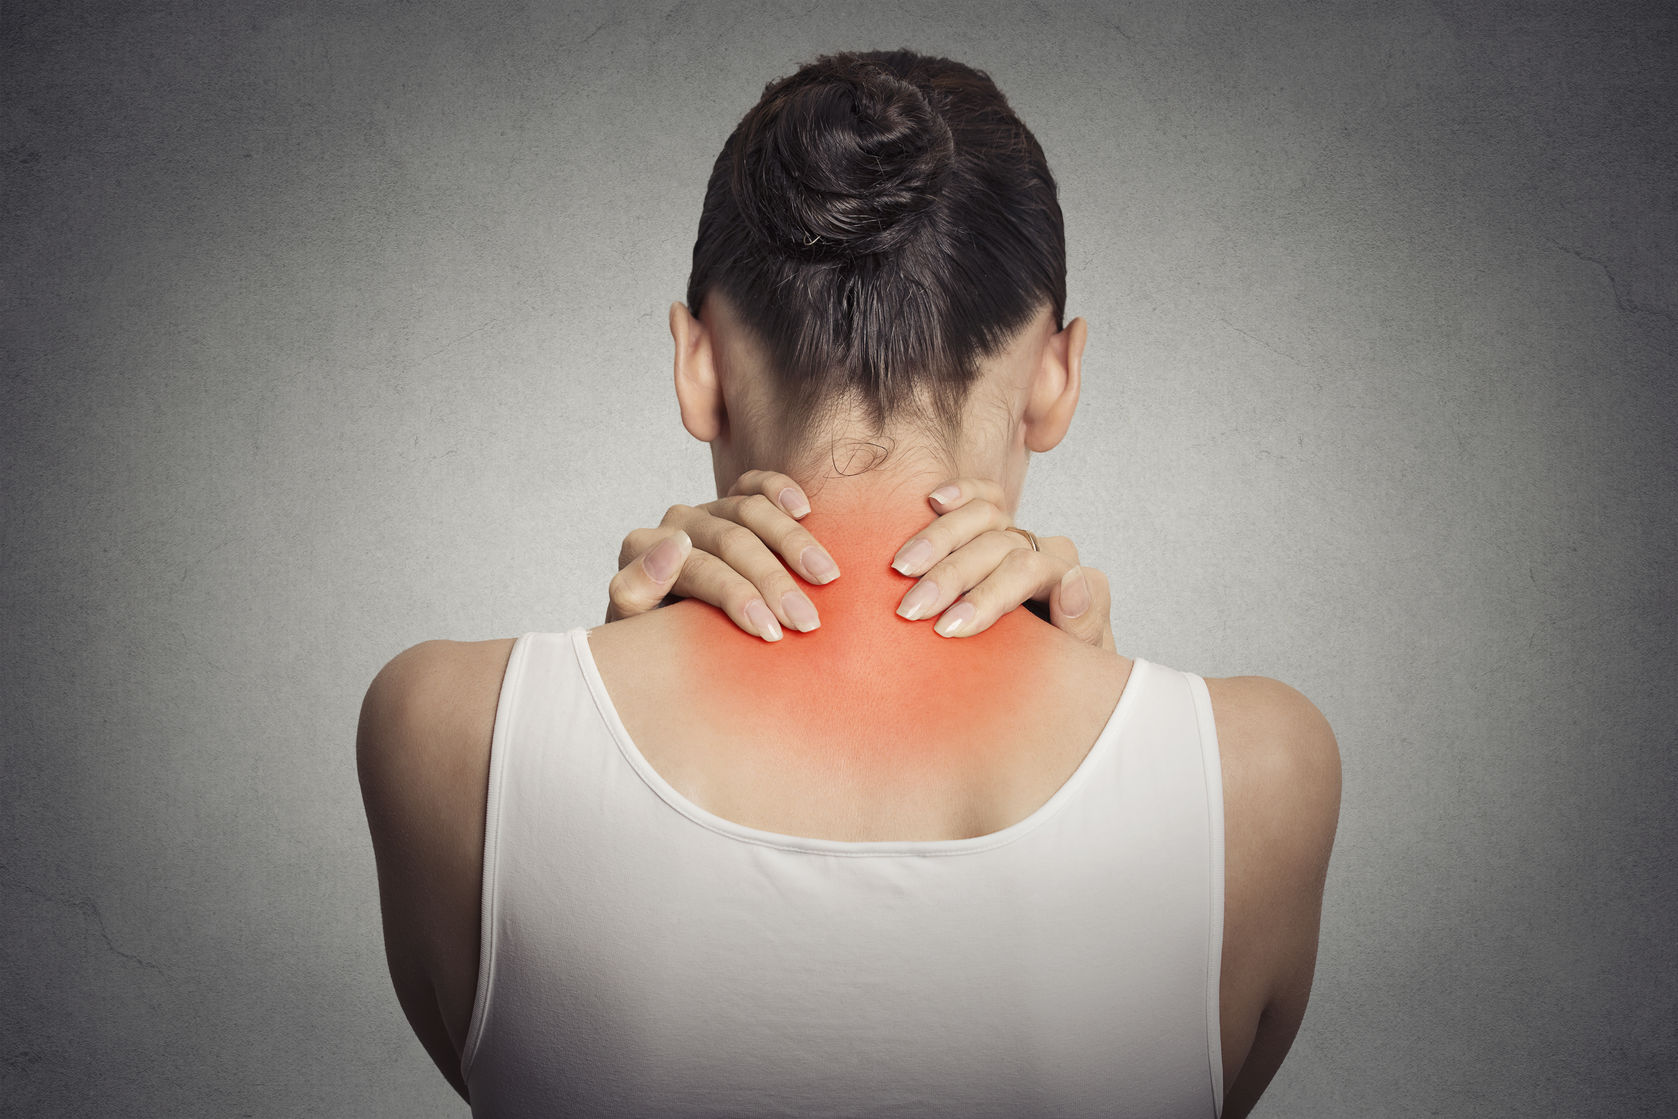 5 Home Remedies To Treat Neck Pain